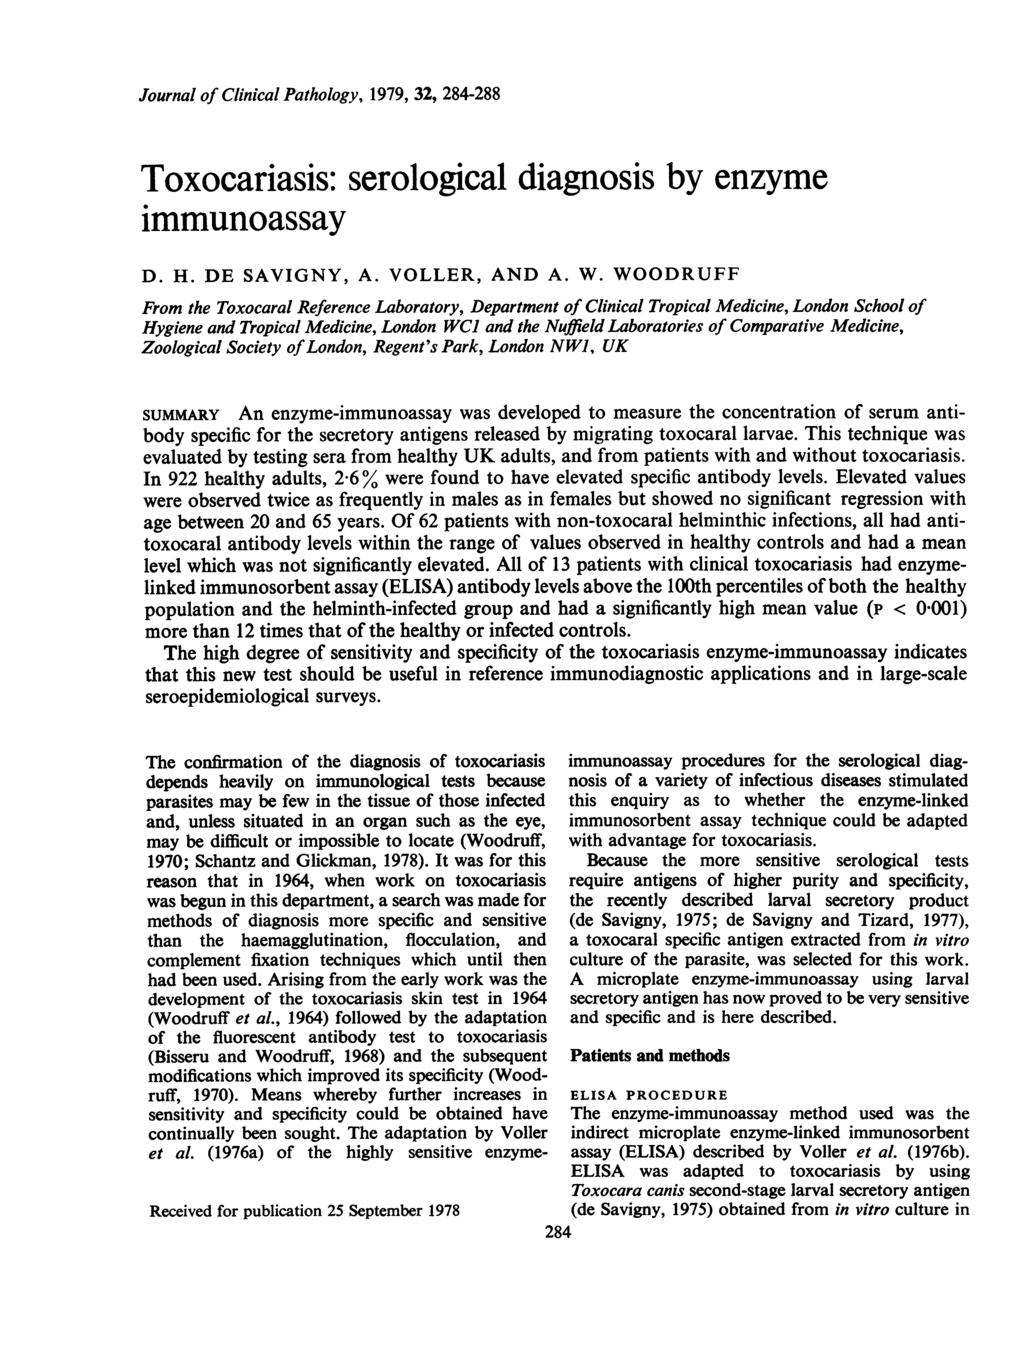 Journal of Clinical Pathology, 1979, 32, 284-288 Toxocariasis: serological diagnosis by enzyme immunoassay D. H. DE SAVIGNY, A. VOLLER, AND A. W.